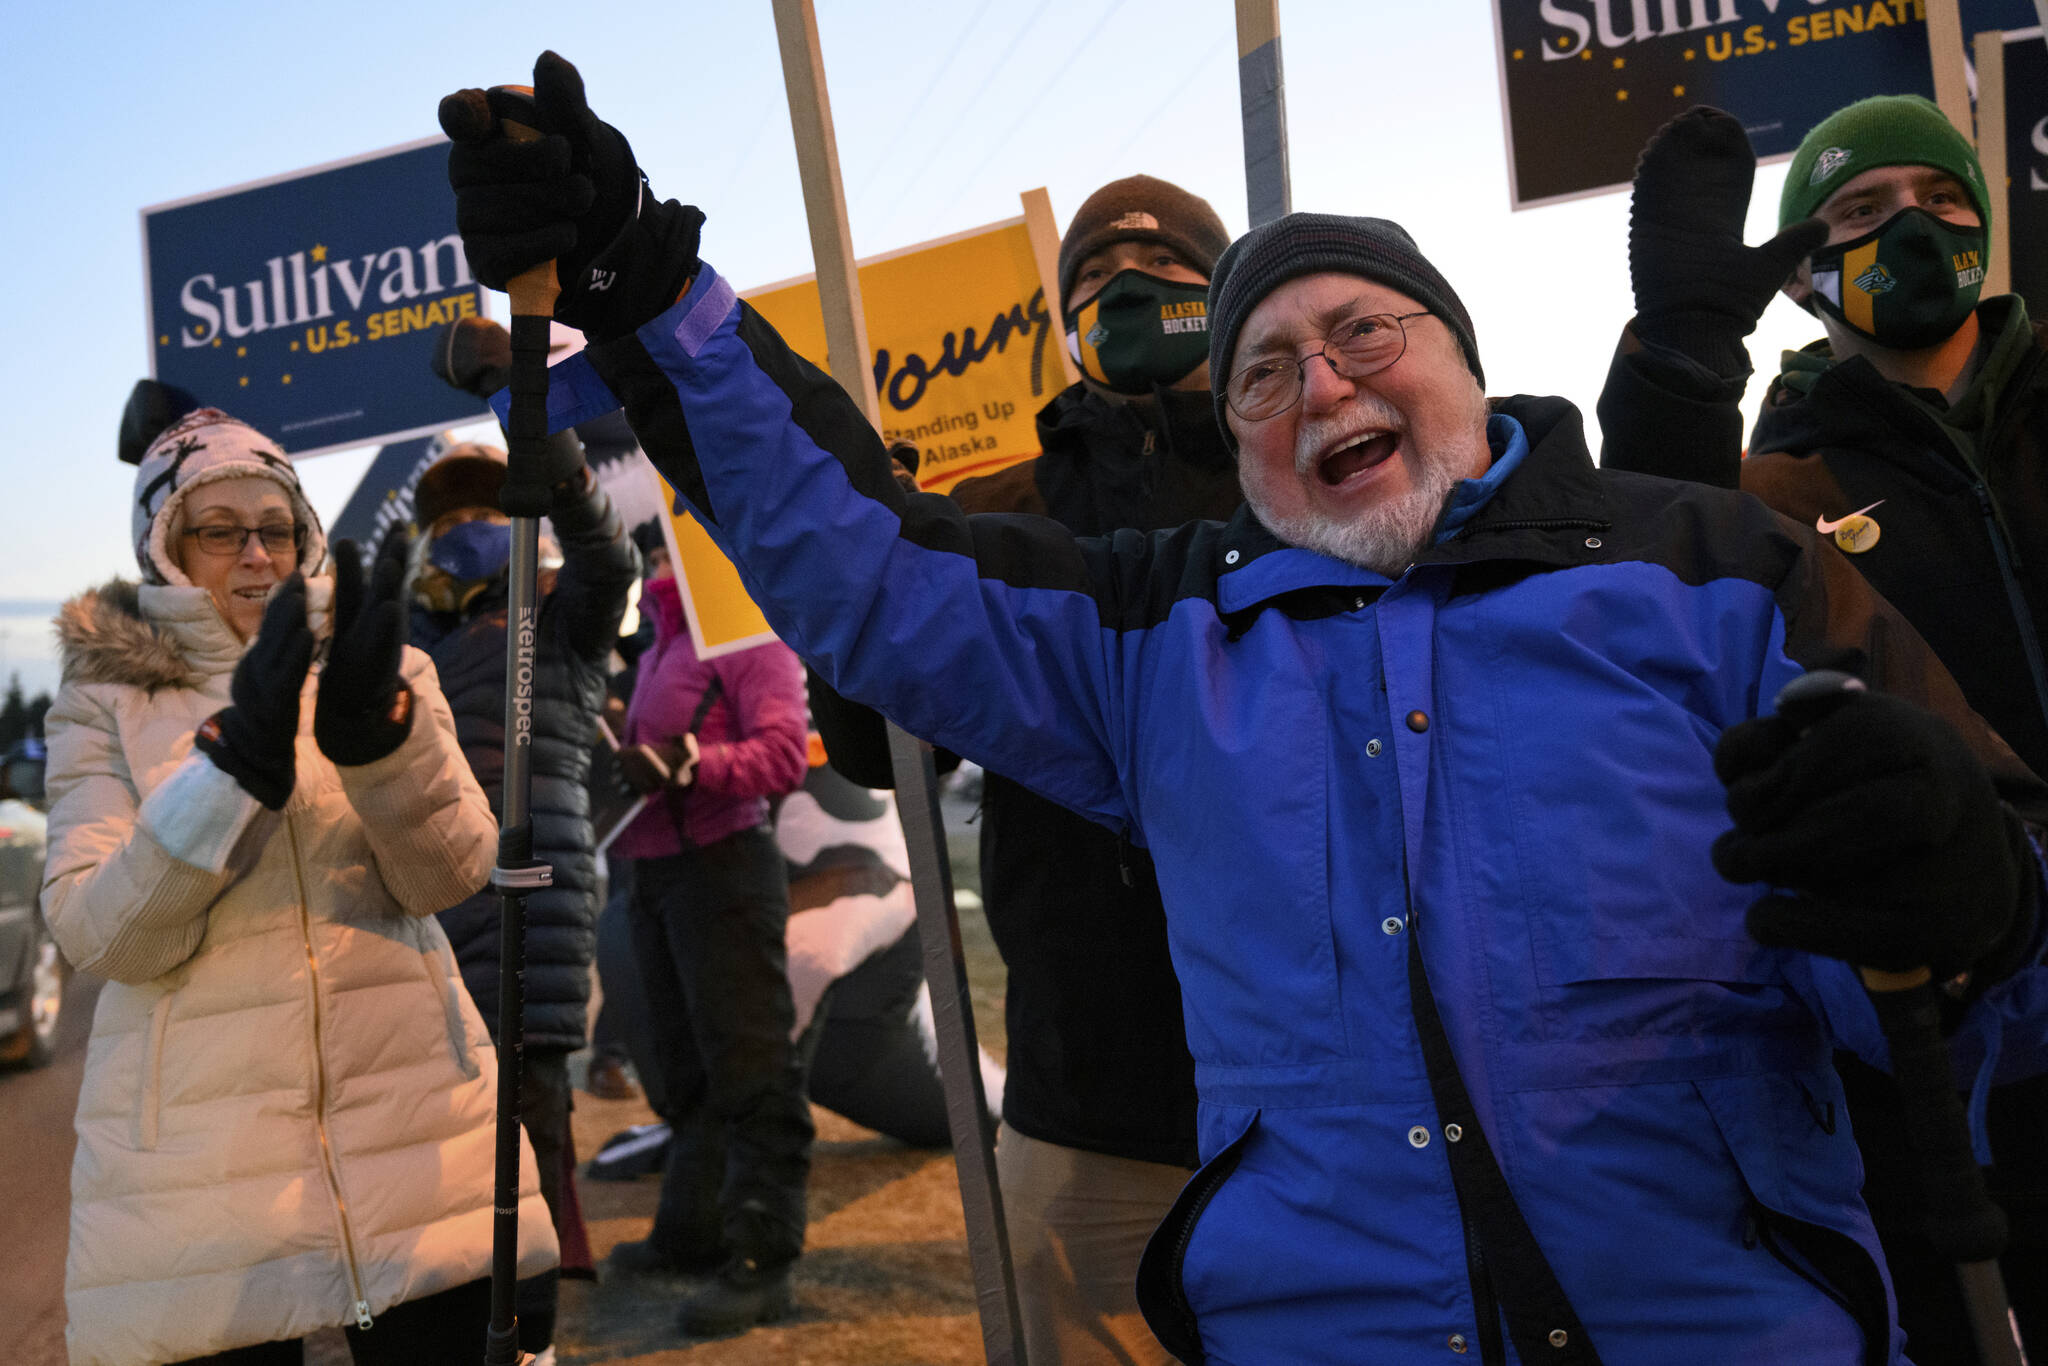 In this Nov. 3, 2020, file photo, Rep. Don Young, R-Alaska, gathers with supporters in Anchorage, Alaska. Young, the longest-serving Republican ever in the U.S. House, died on Friday, March 18, 2022. Republican Nick Begich and Democrat Christopher Constant are running in a special election to finish his term in office. (Marc Lester/Anchorage Daily News via AP, File)